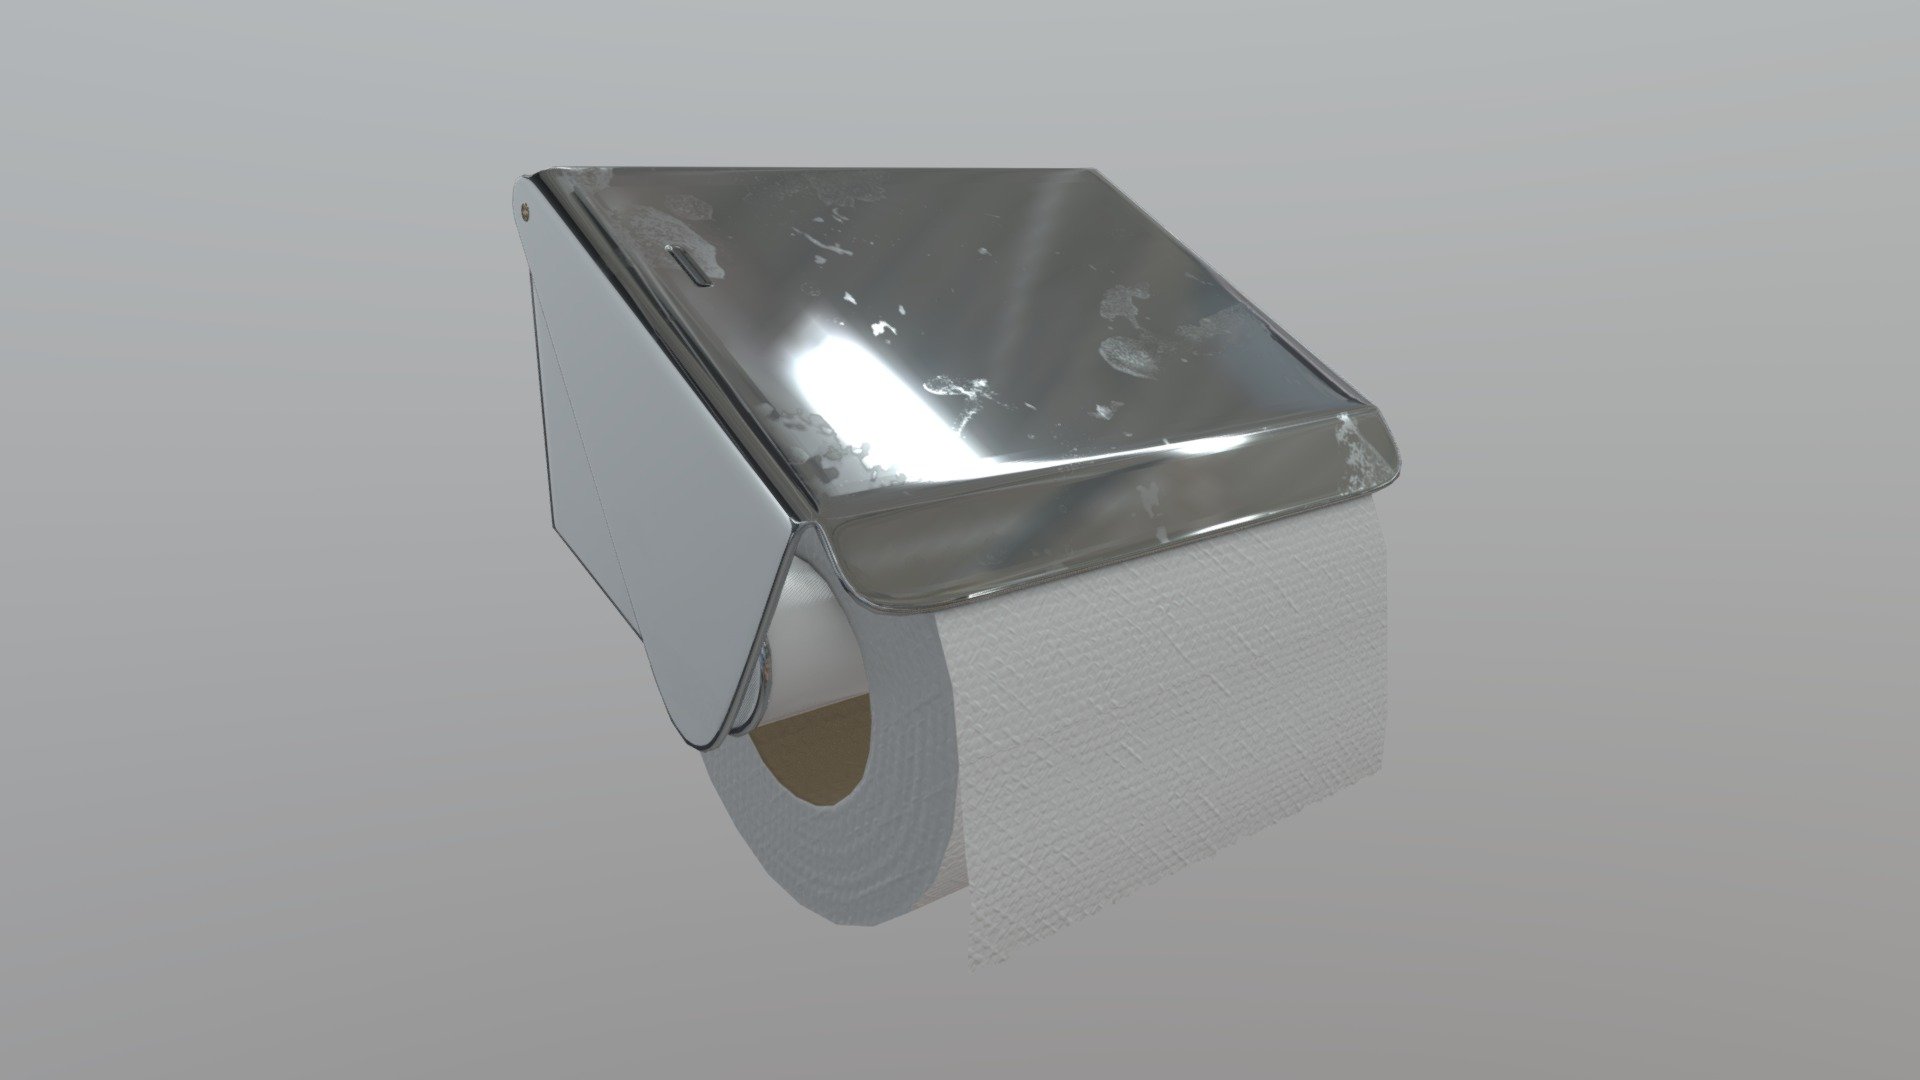 Bathroom toilet paper holder. Can be used as a game asset.

Modeled in Blender 3D, textured in Substance Painter 3d model